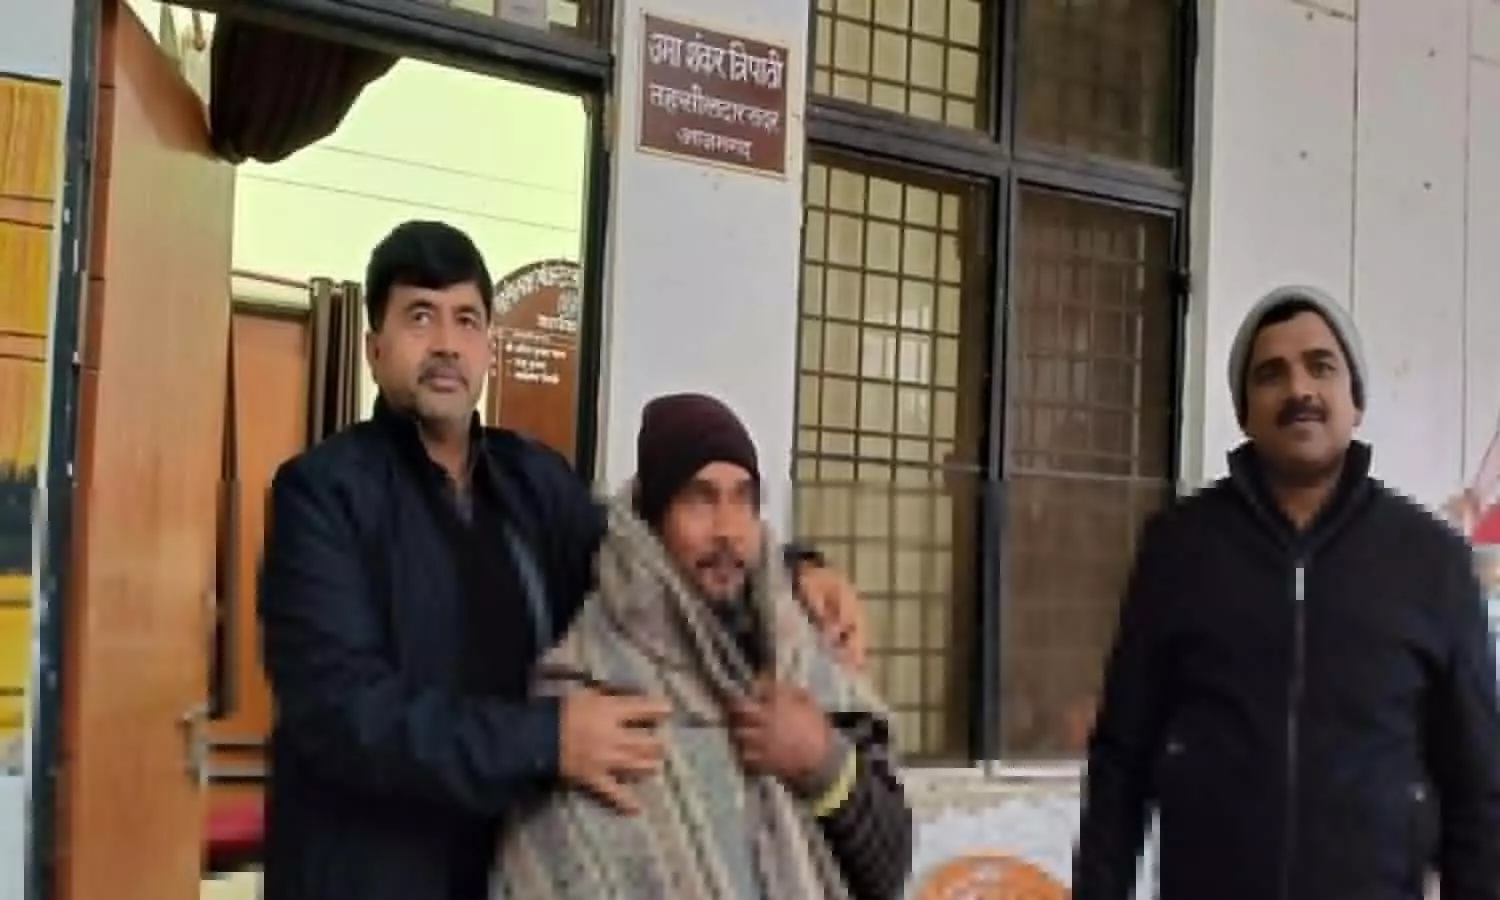 Sadar Tehsildar distributed blankets to the poor in severe cold in Azamgarh